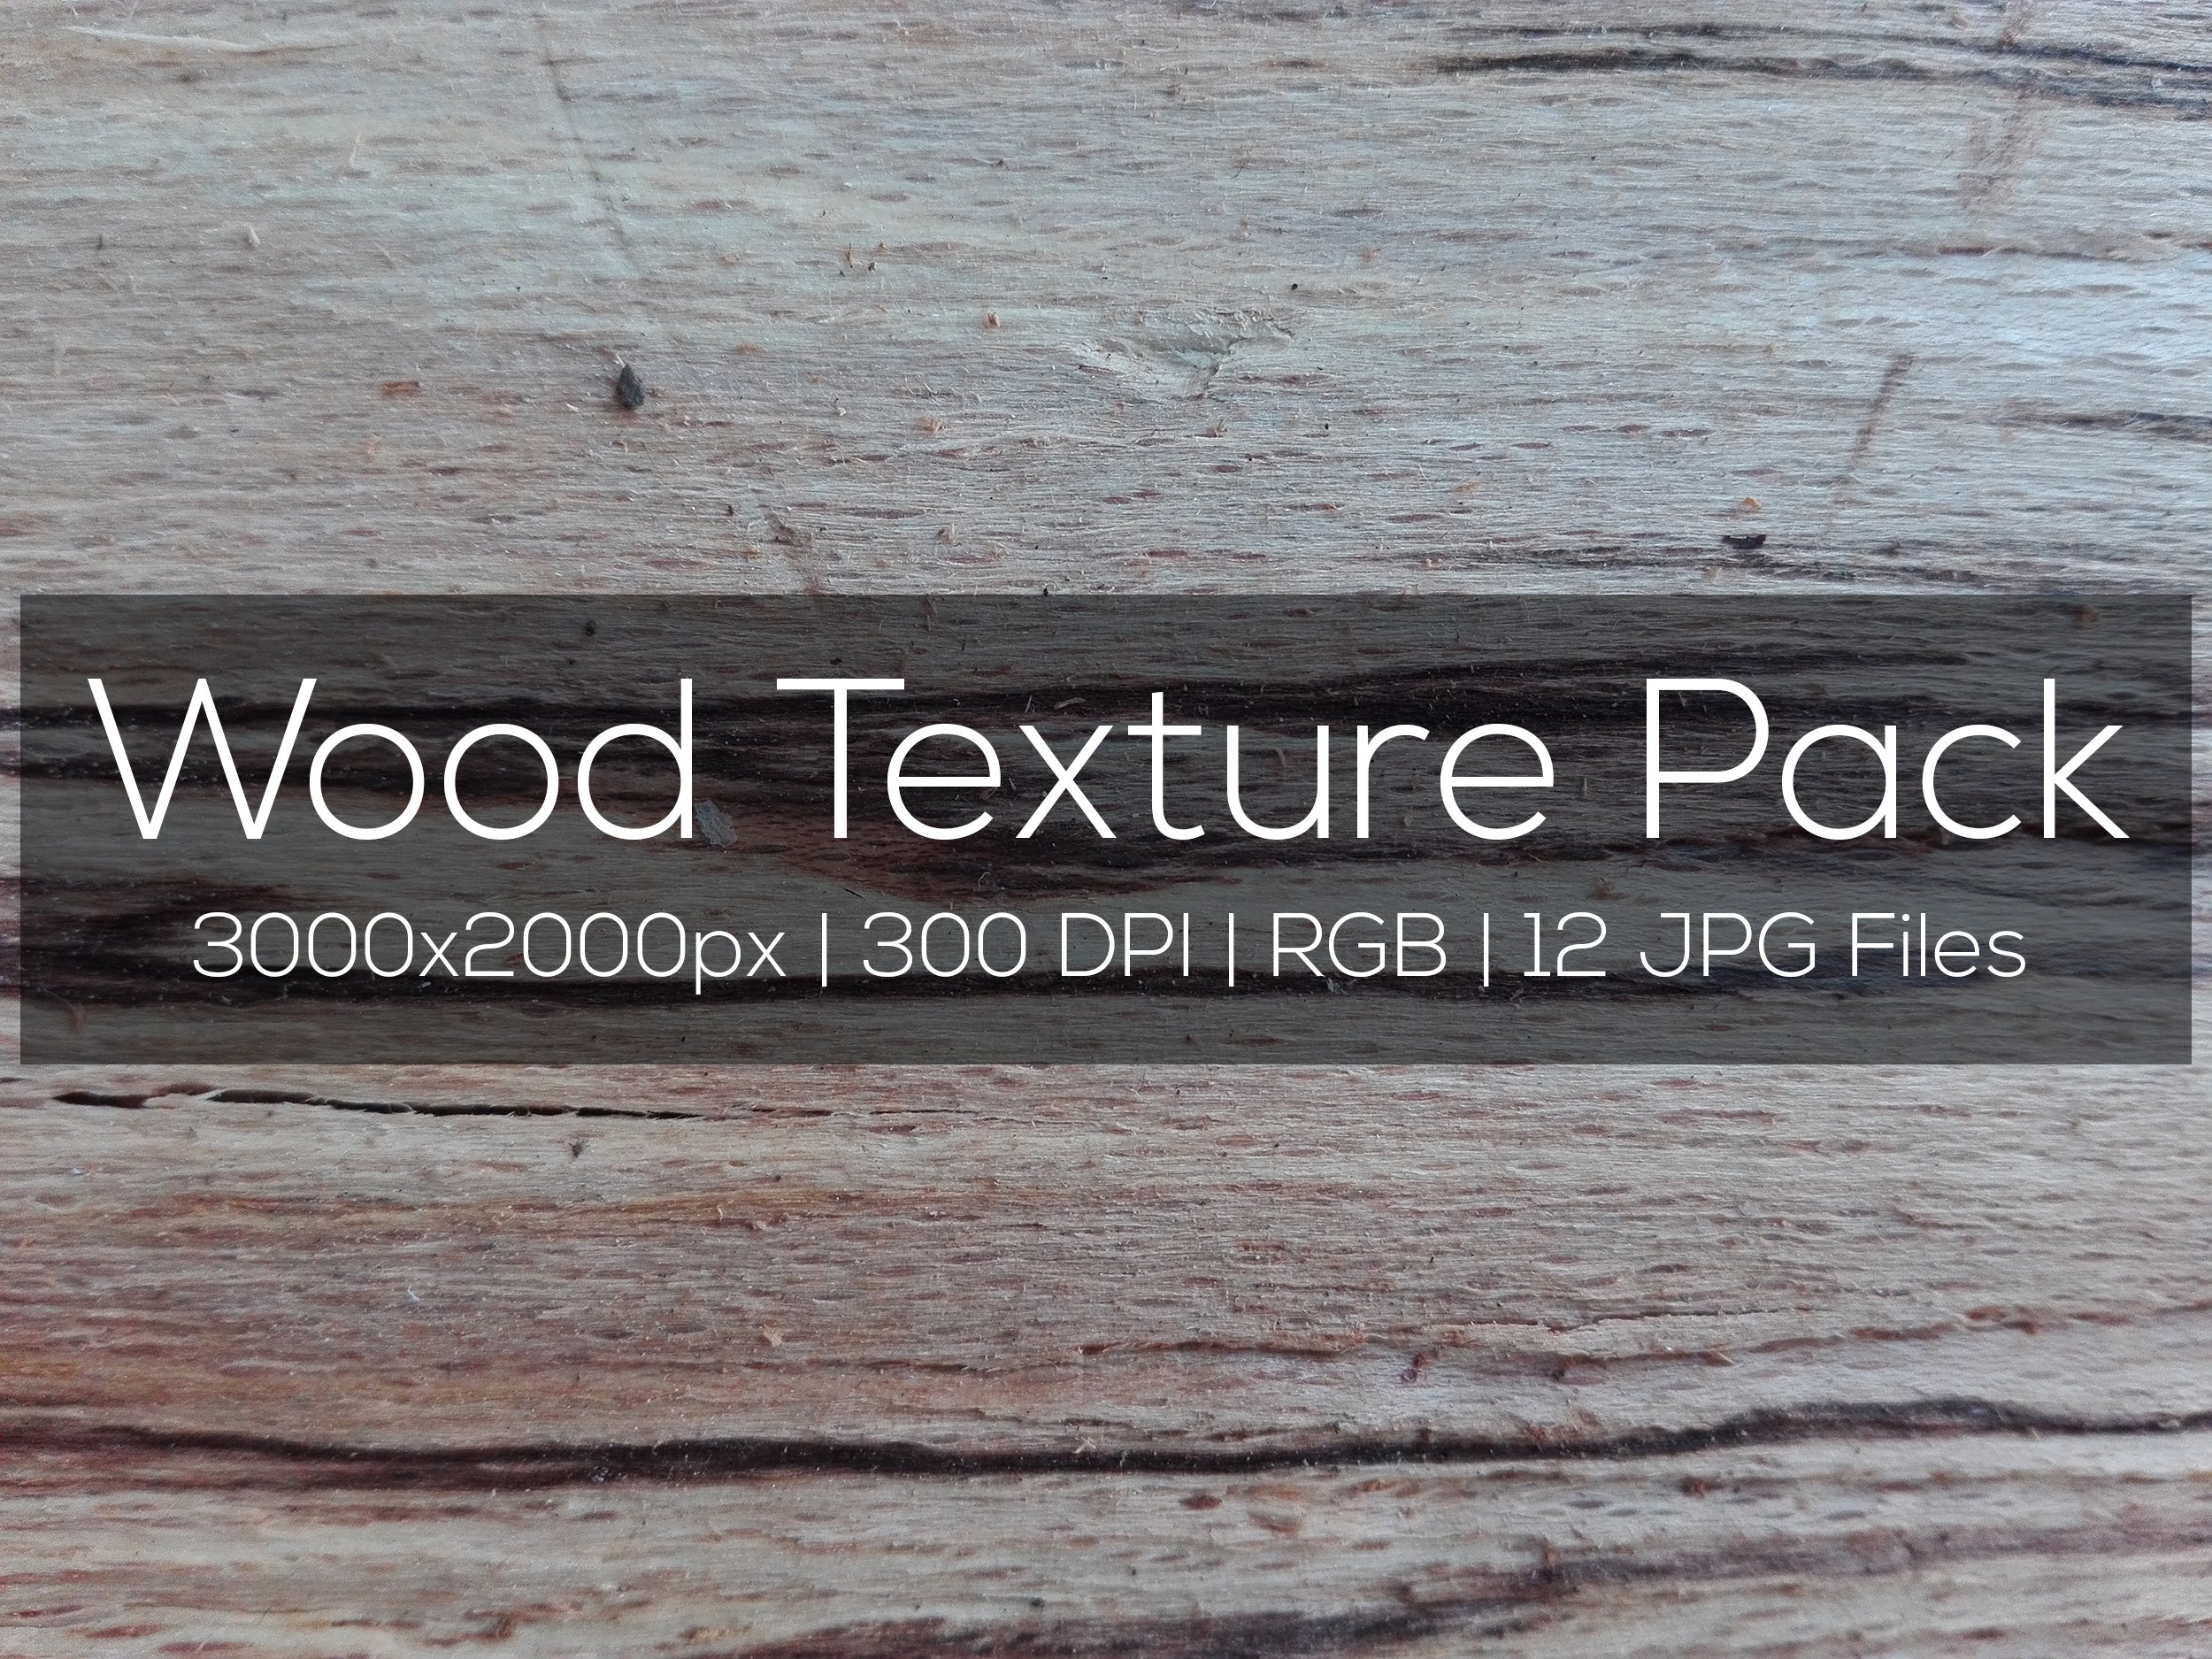 Wood Texture Pack cover image.